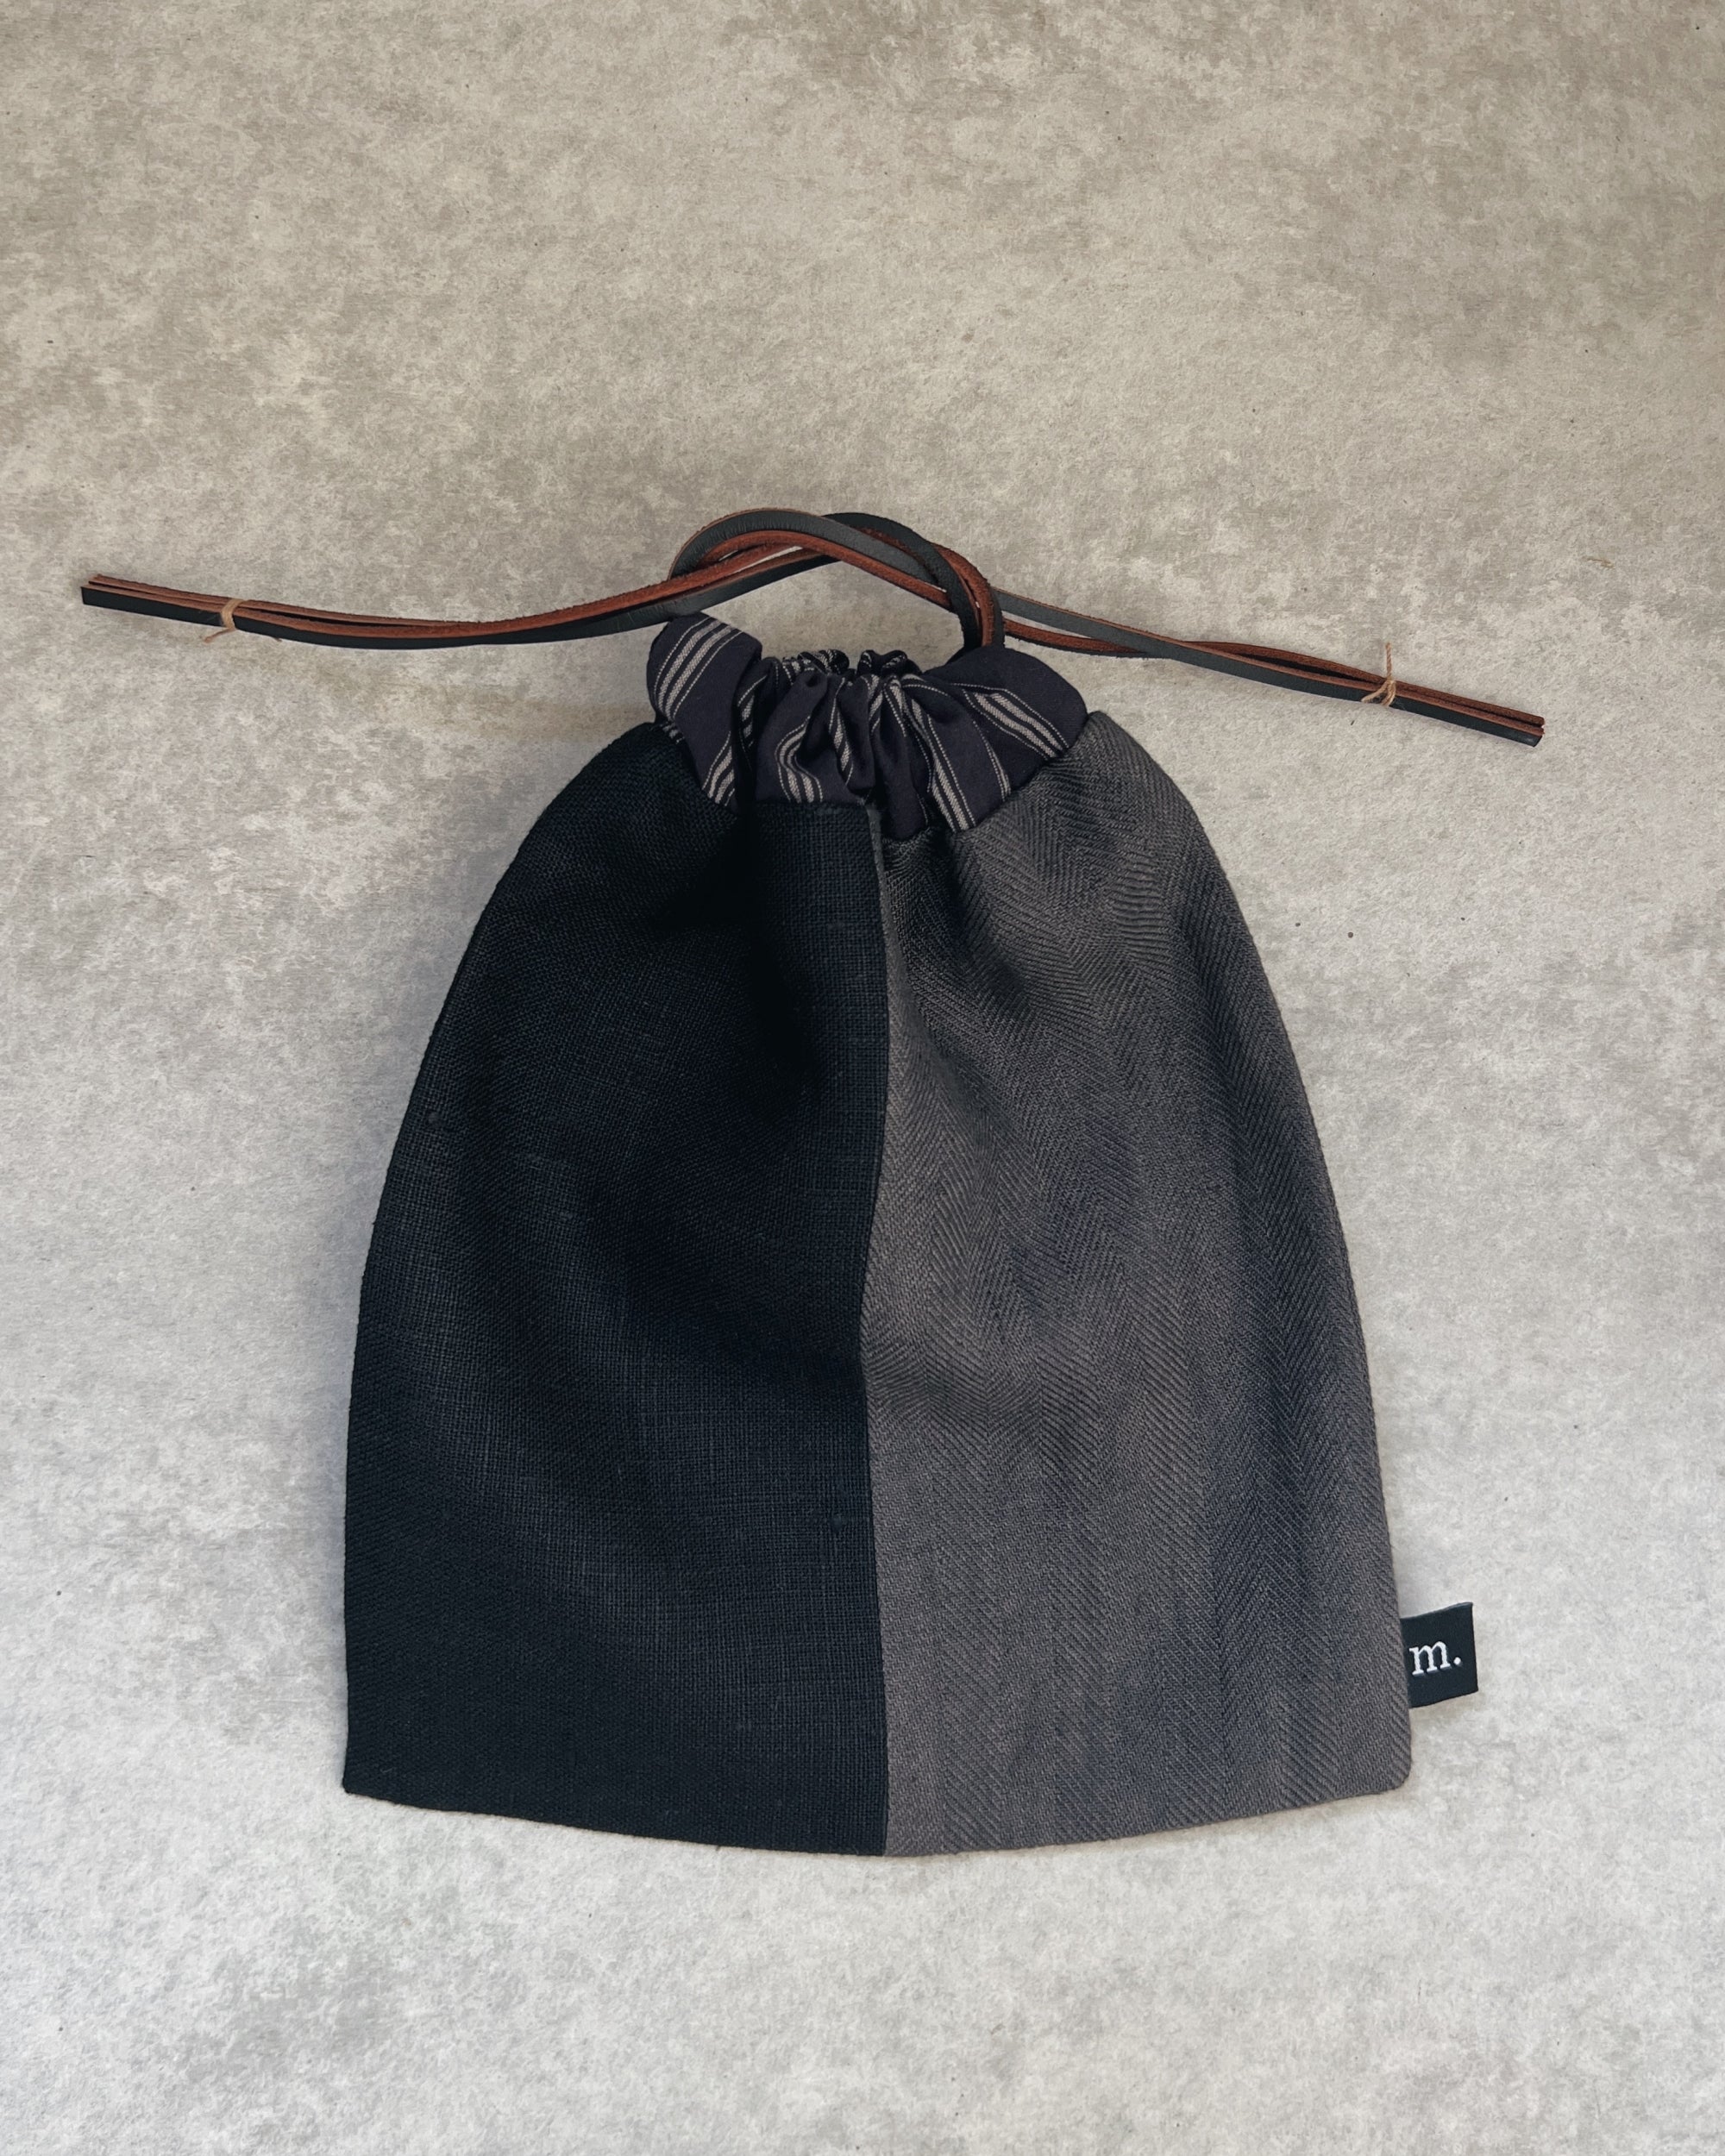 kit bag with leather drawstring 